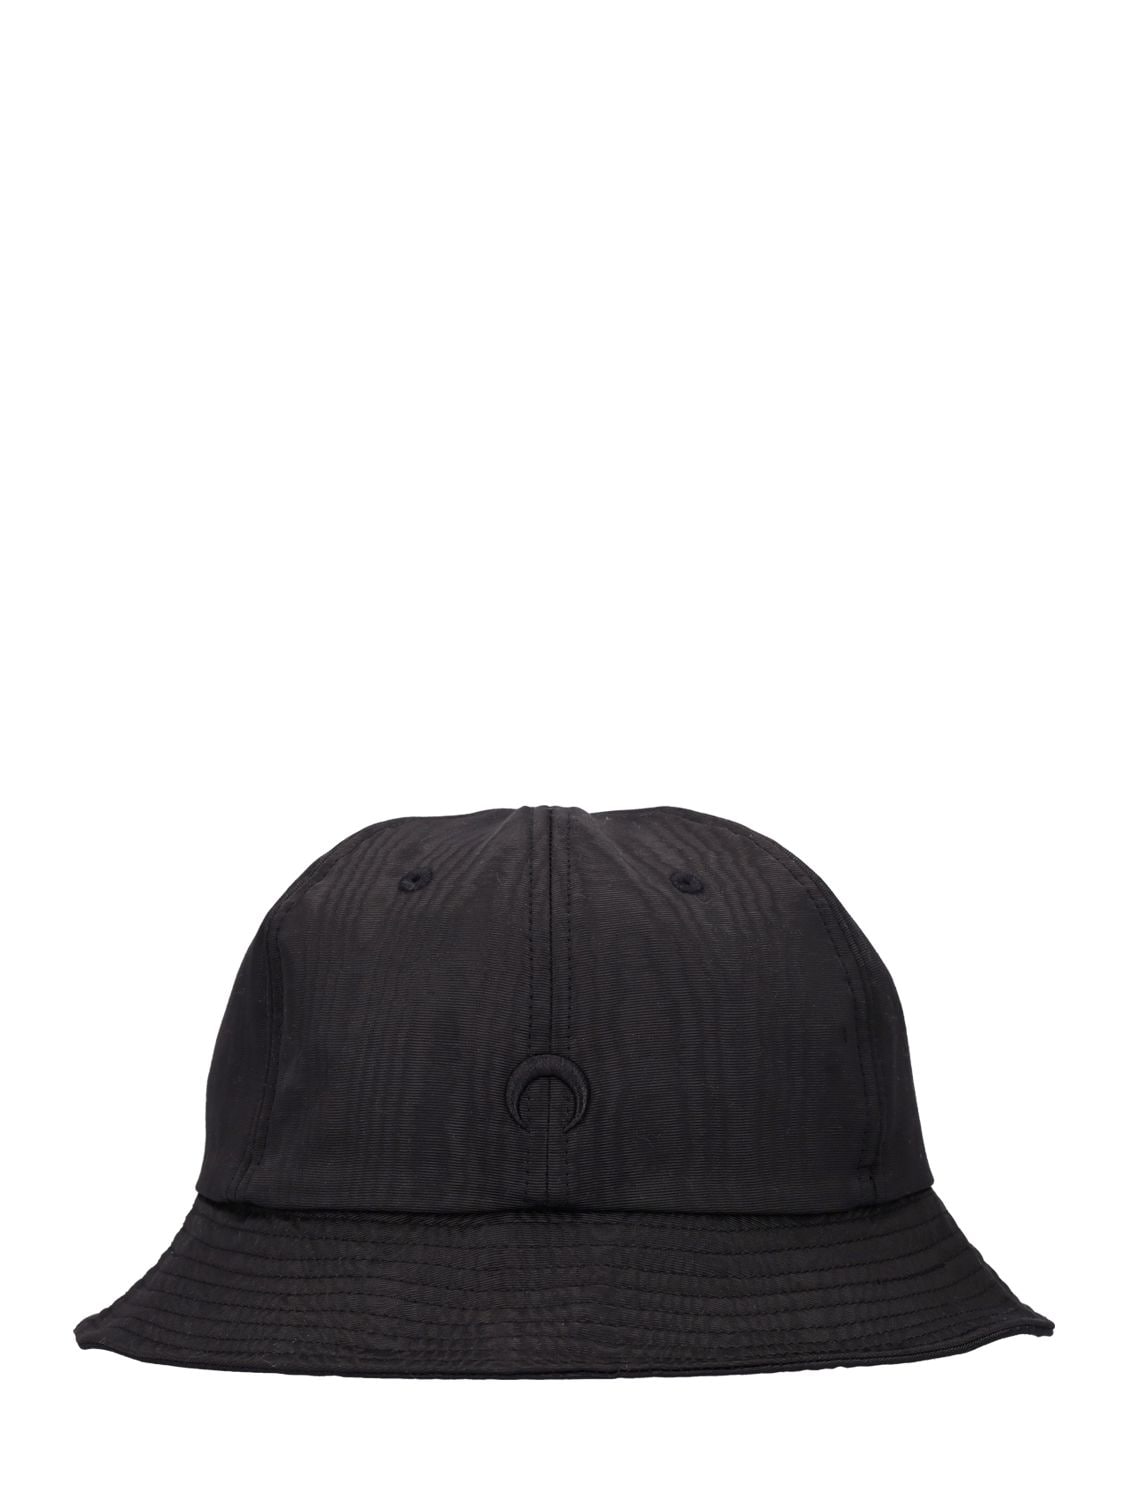 Marine Serre Embroidered Moon Recycled Bucket Hat